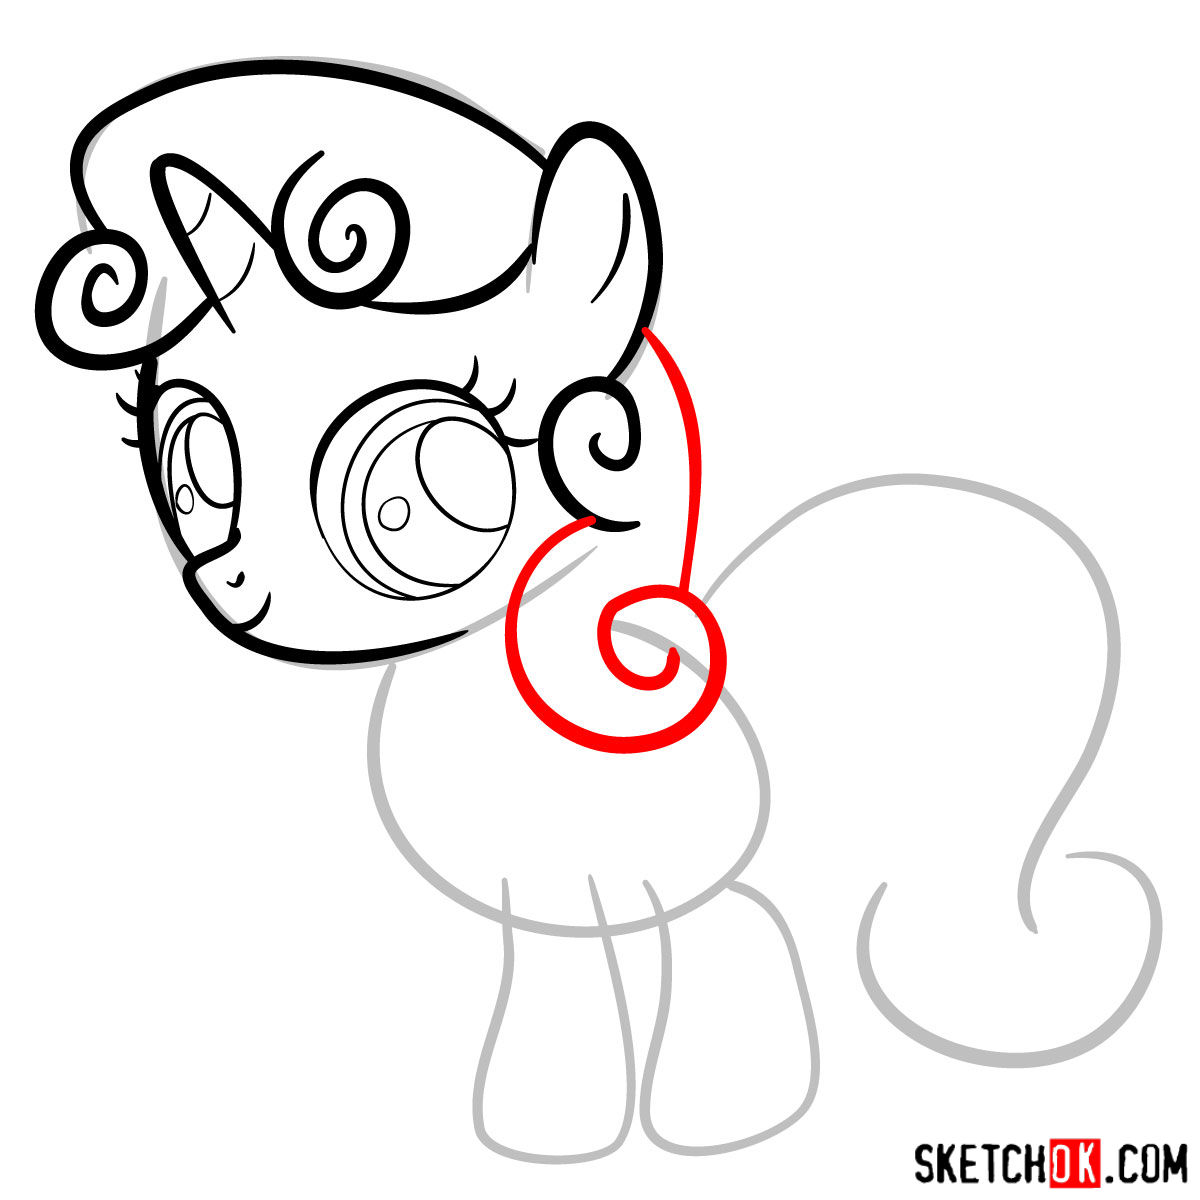 How to draw Sweetie Belle | MLP - Step by step drawing tutorials